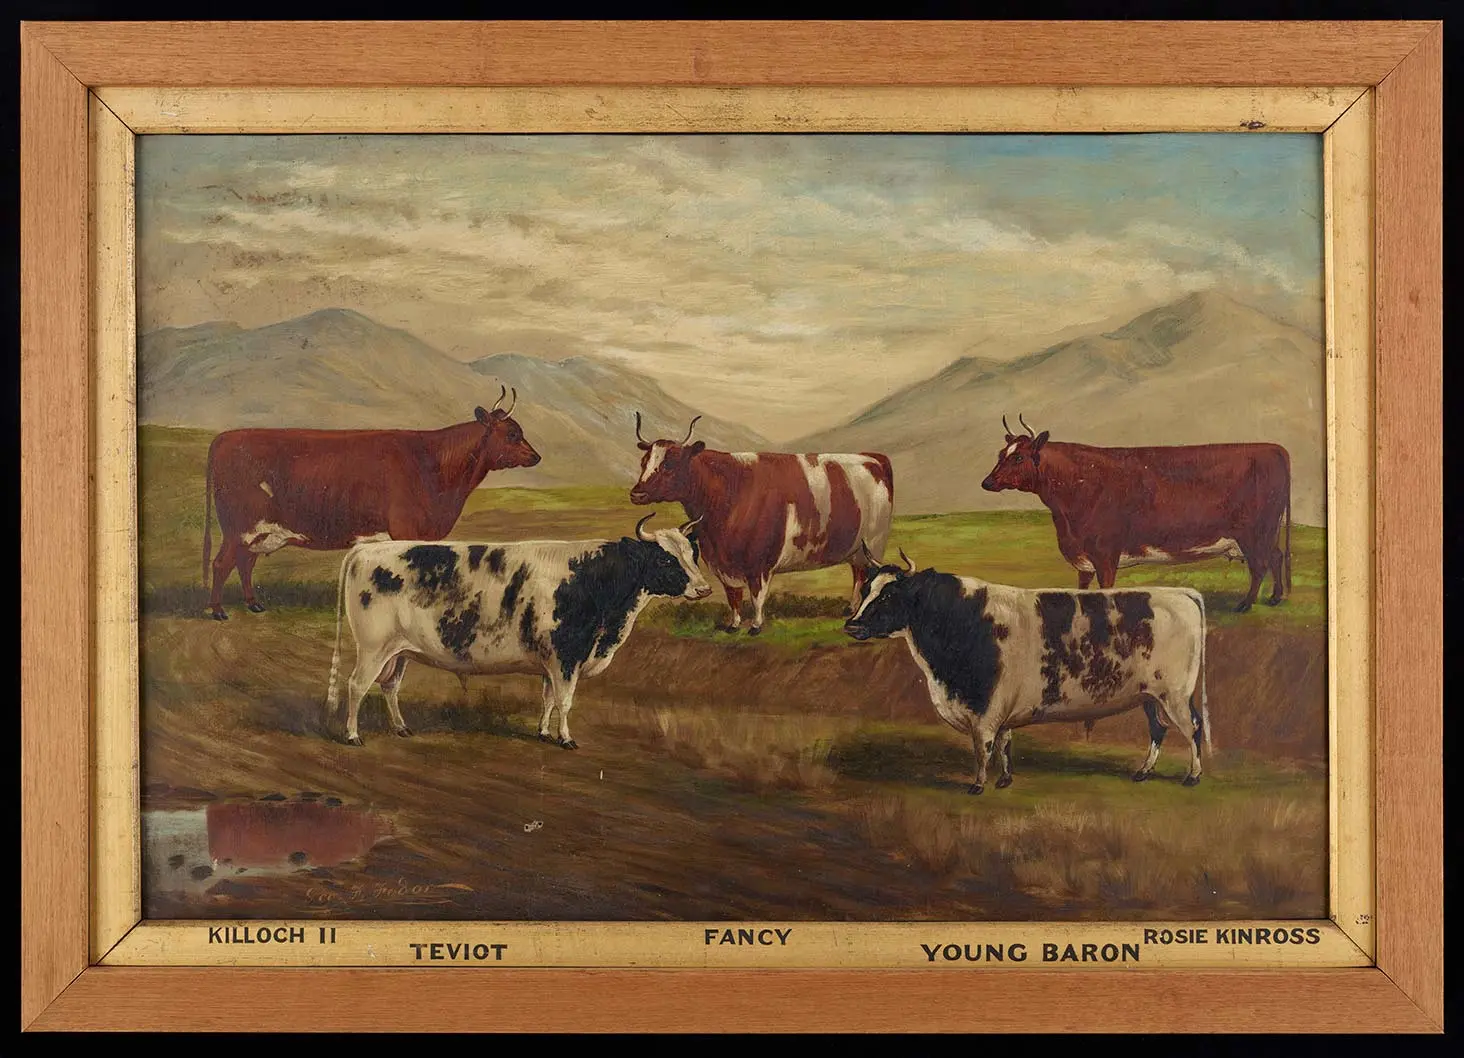 Framed painting of 3 brown-and-white cows and 2 black-and-white bulls in a field with mountains in the background. Cattle names noted in the inner picture framing: Killoch III, Teviot, Fancy, Young Baron, Rosie Kinross.